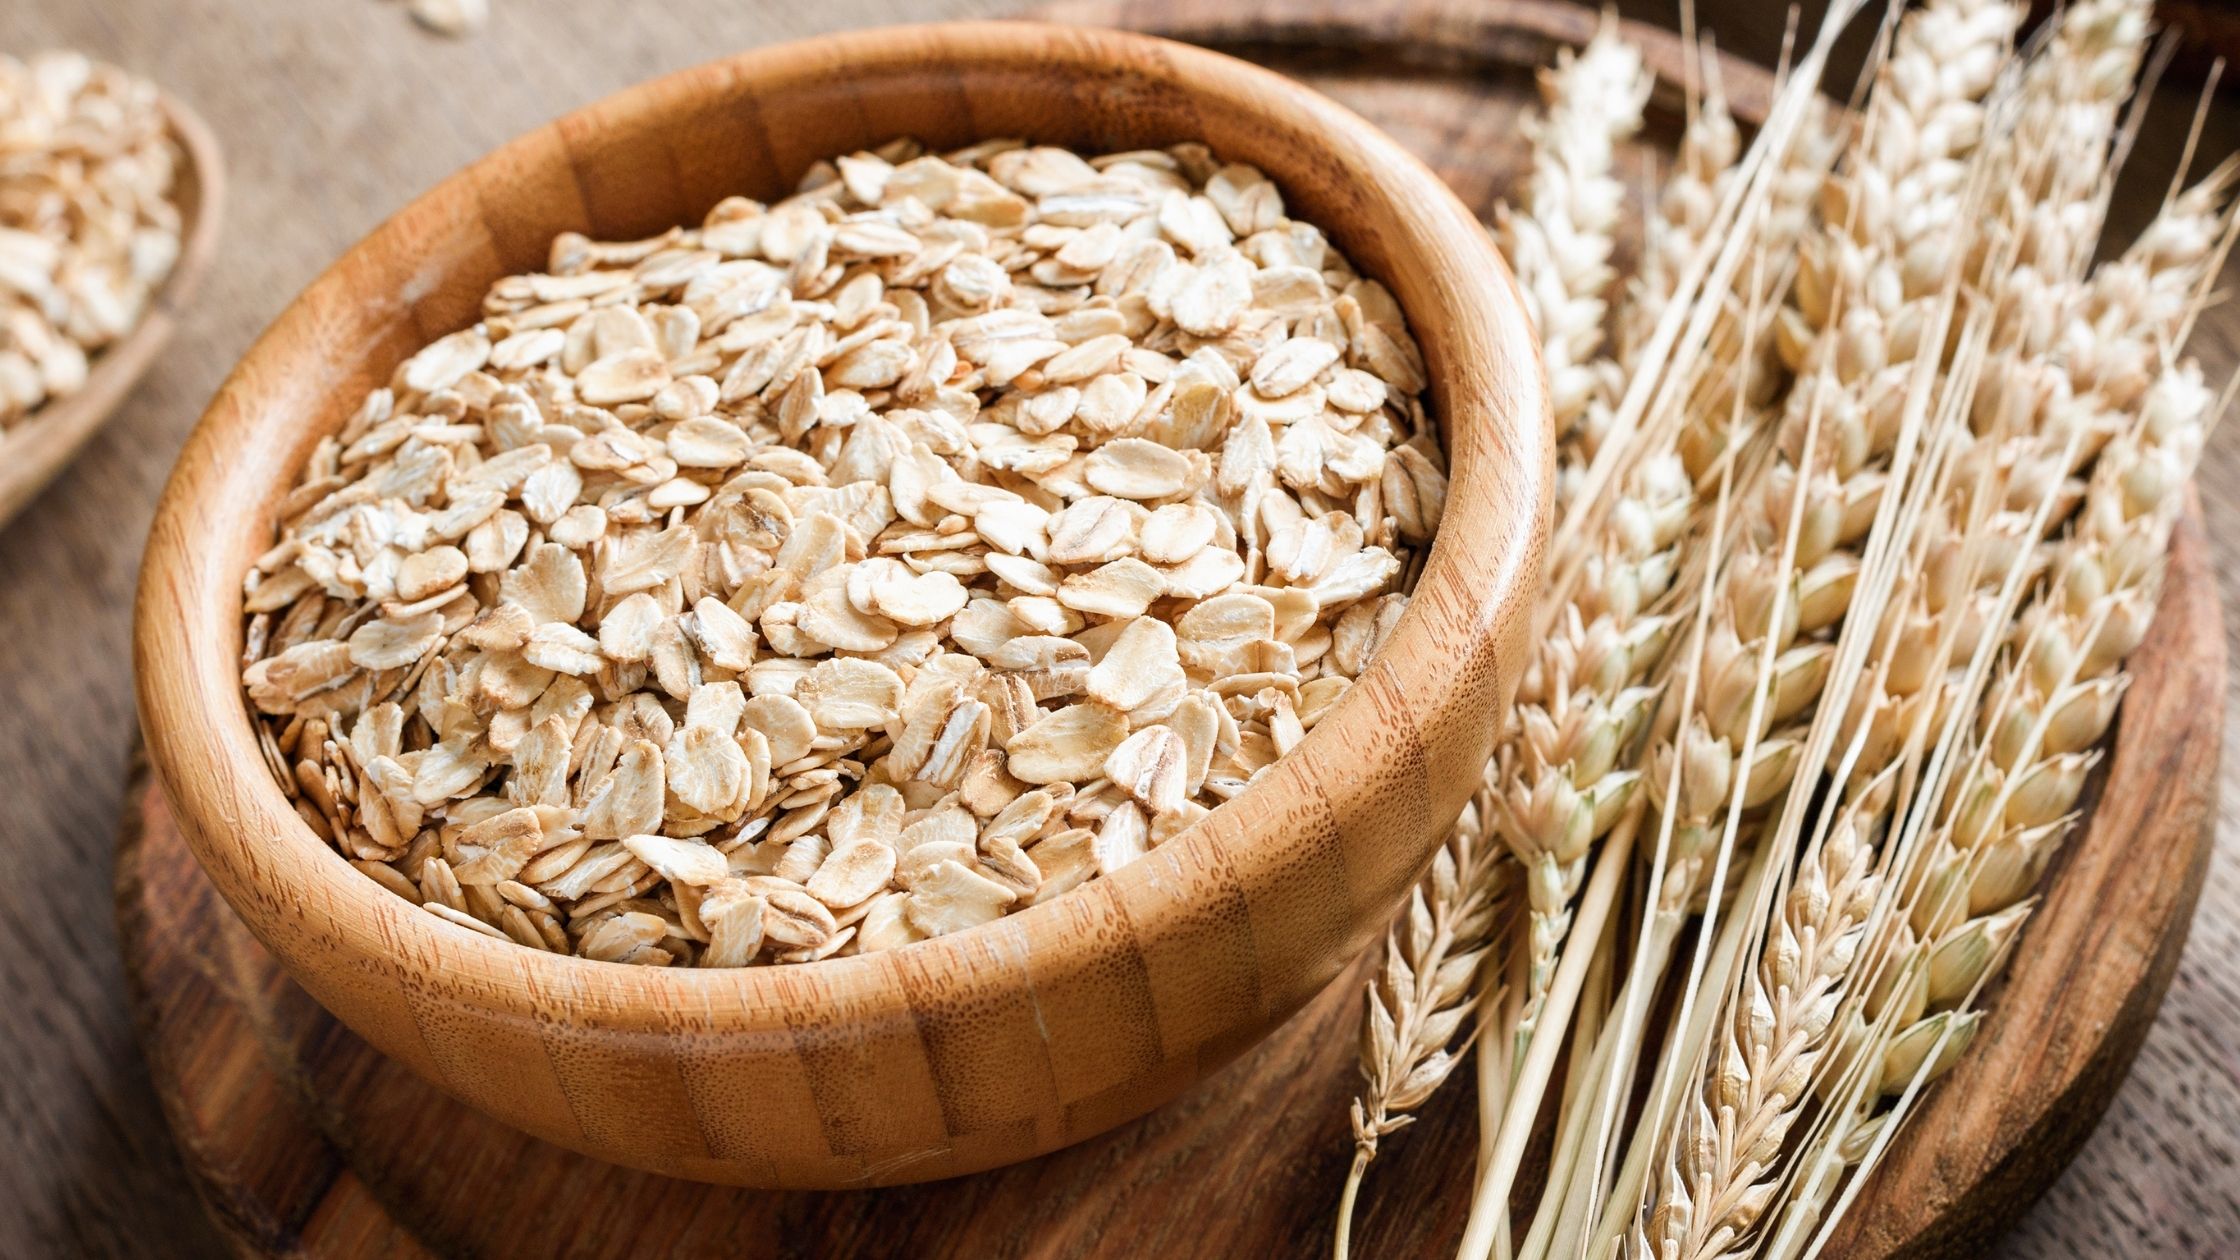 Oatmeal: Fiber and Satiety